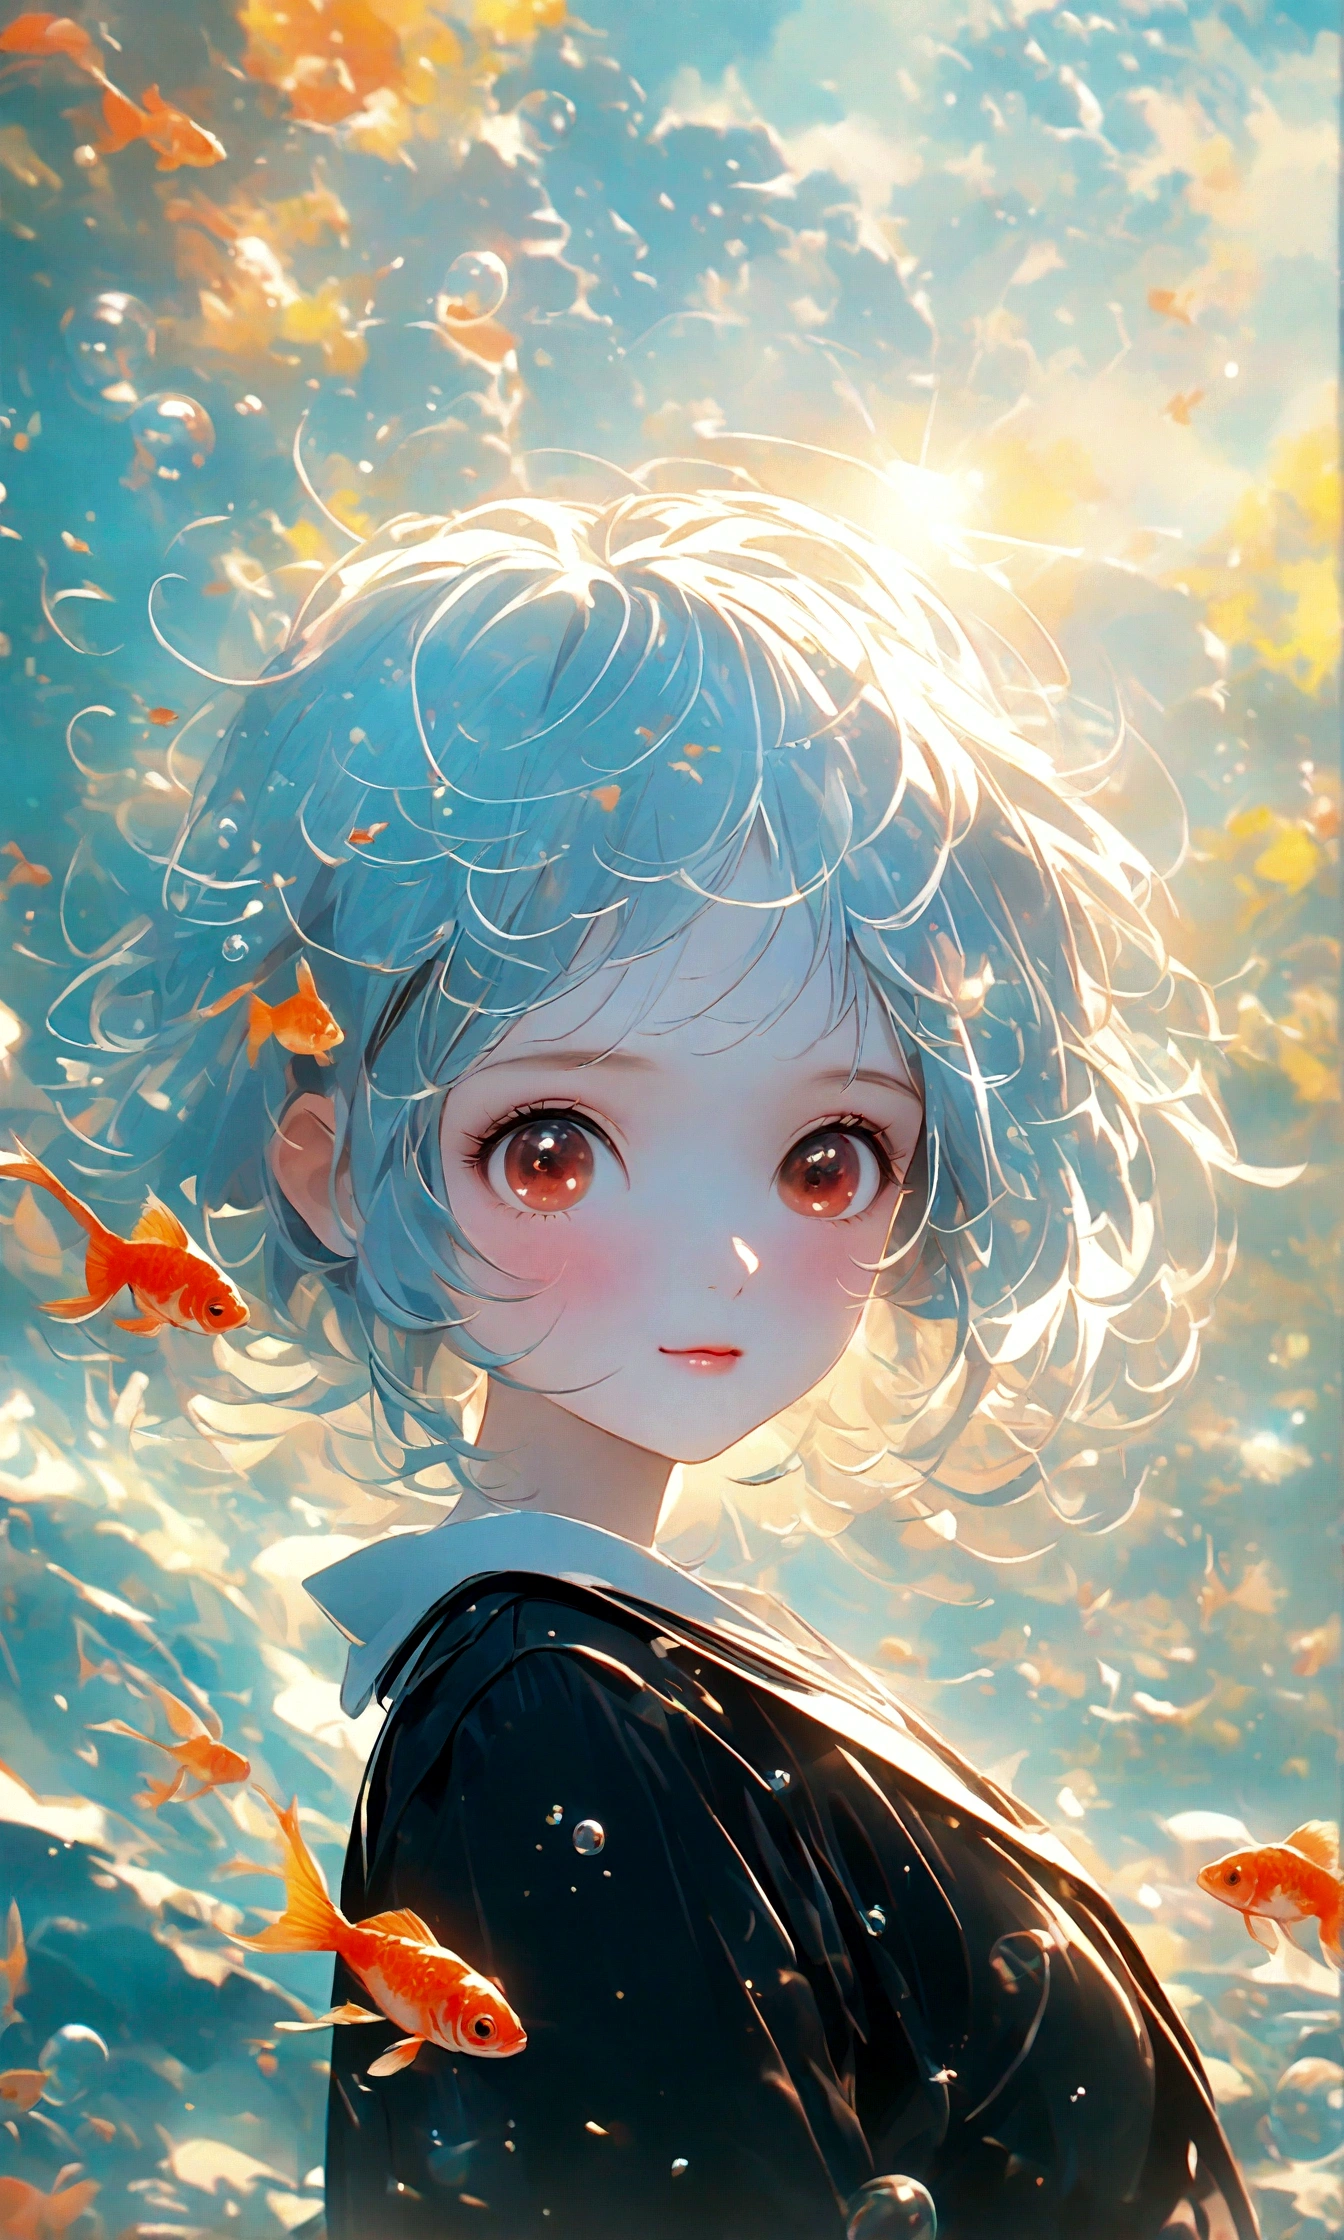 (woman\(student, 15 years old, JK, Silver flowing short hair, Cosmic eyes, Black , Pale skin, Tired face，Eyes without luster\) look up to the sky), (Many goldfish swimming in the air), Beautiful sky, Beautiful clouds, in summer，Colorful flowers blooming everywhere, (Crystal clear bubbles sparkle in the sky), There is a midday moon and a midday star in the sky, woman is at messy downtown, rest ,quality\(8K,Extremely detailed CG unit wallpaper, masterpiece,High resolution,top-quality,top-quality real texture skin,Surrealism,Improve resolution,RAW photos,Best quality,Very detailed,wallpaper,movie lighting,Ray Tracing,Golden Ratio\),(long shot),Wide-angle lens,